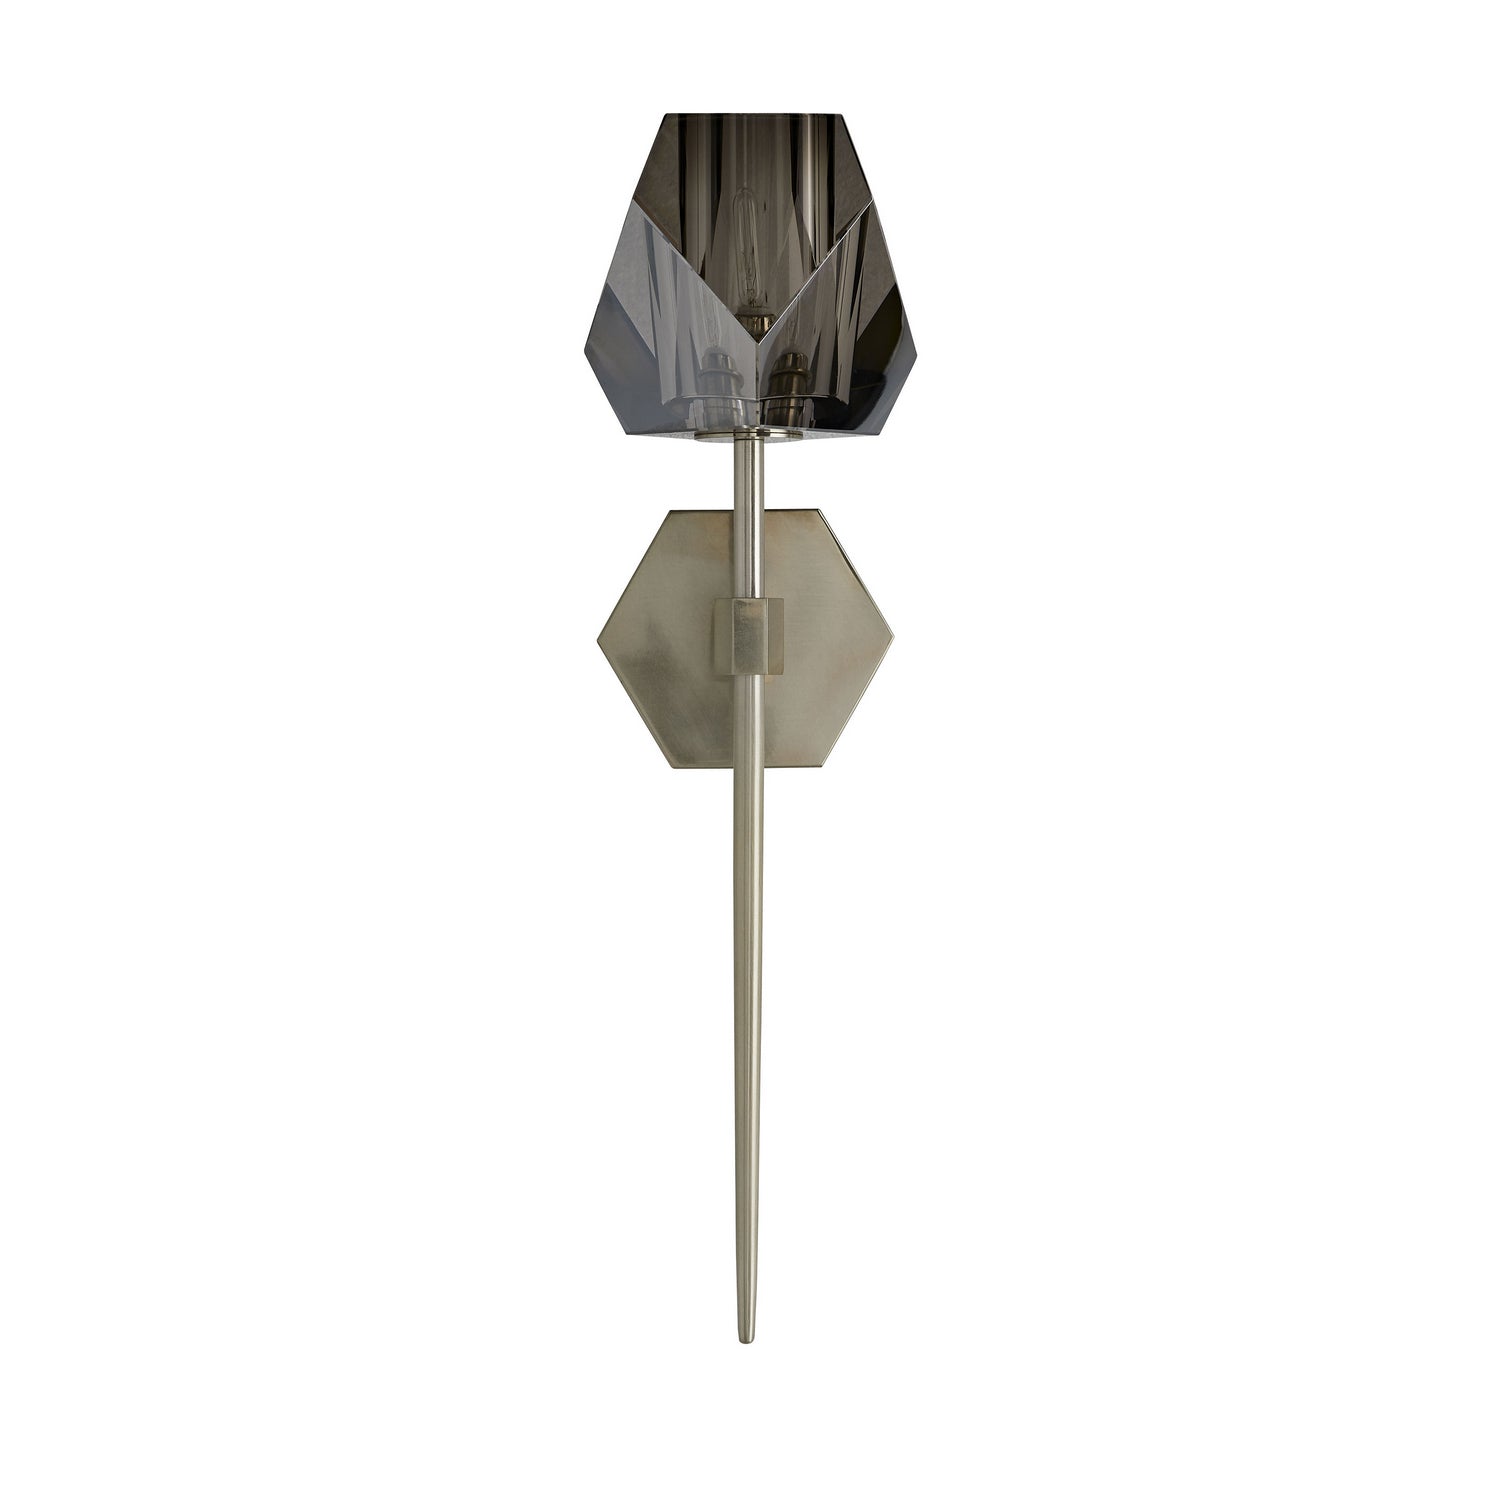 One Light Wall Sconce from the Gemma collection in Smoke finish